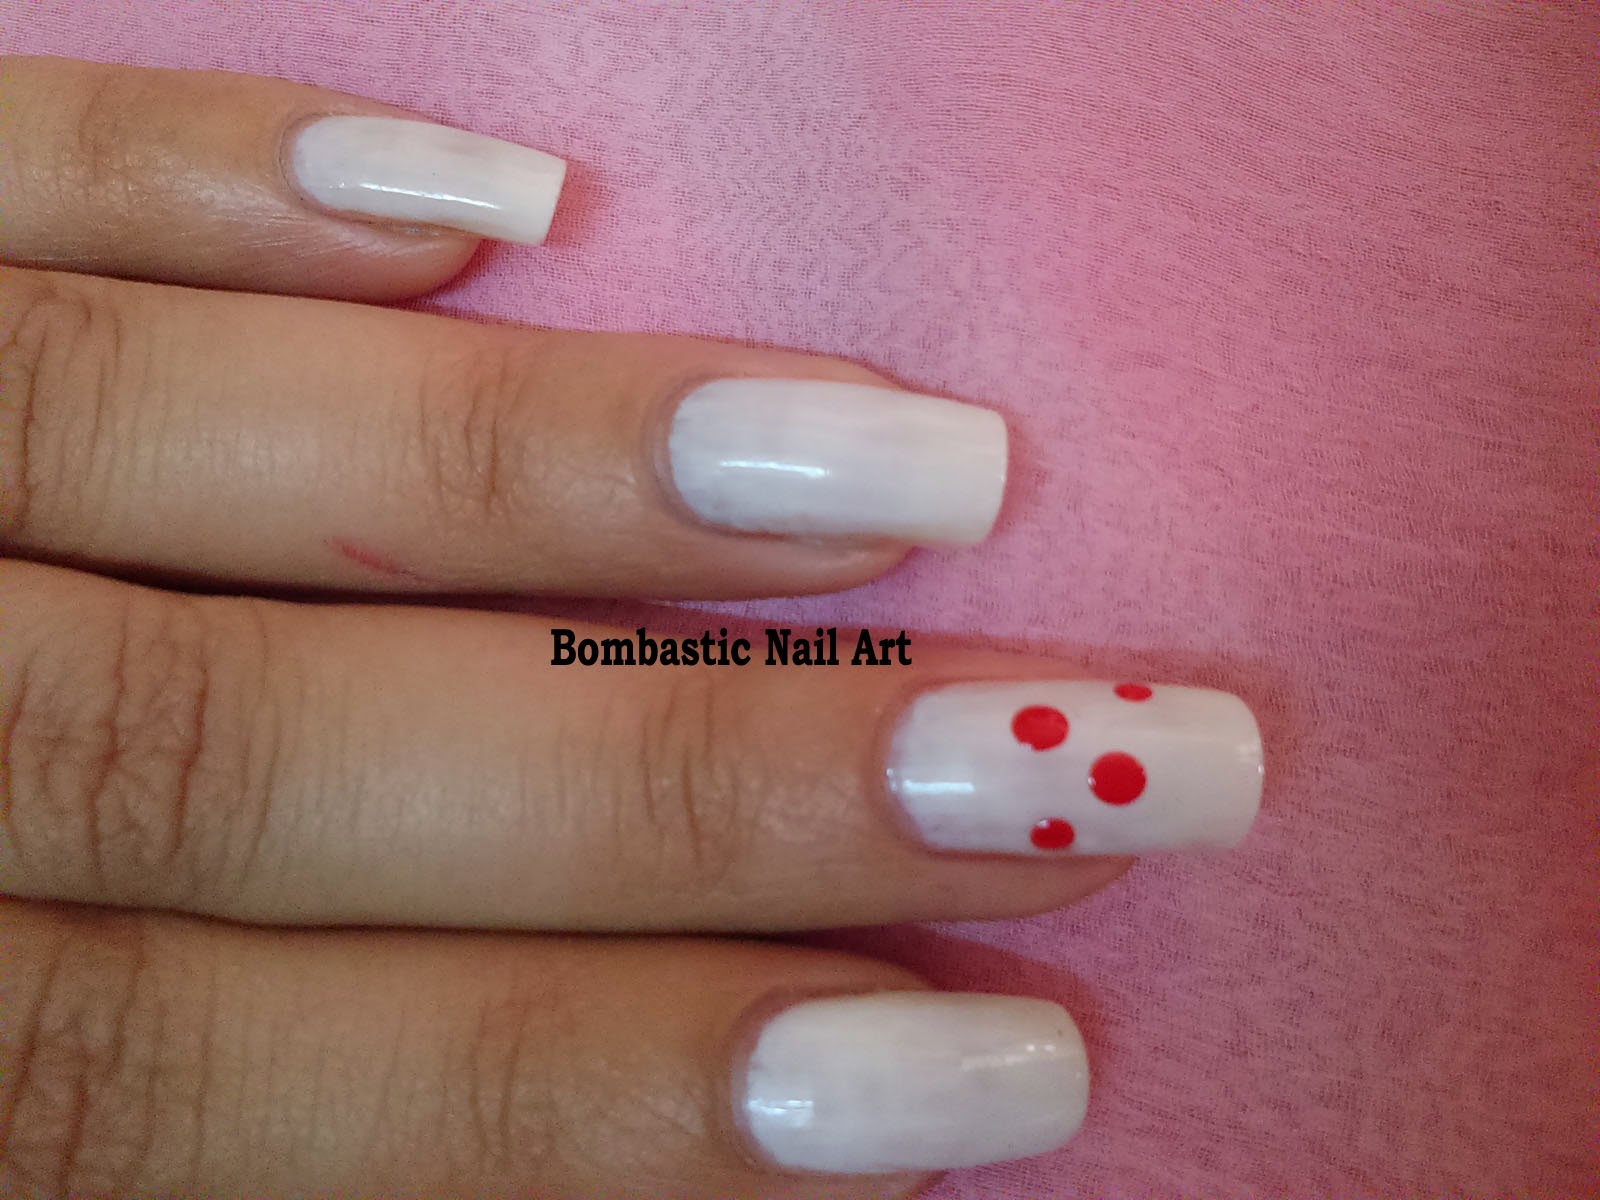 1. Chanel Dripping Nail Art Tutorial - wide 7